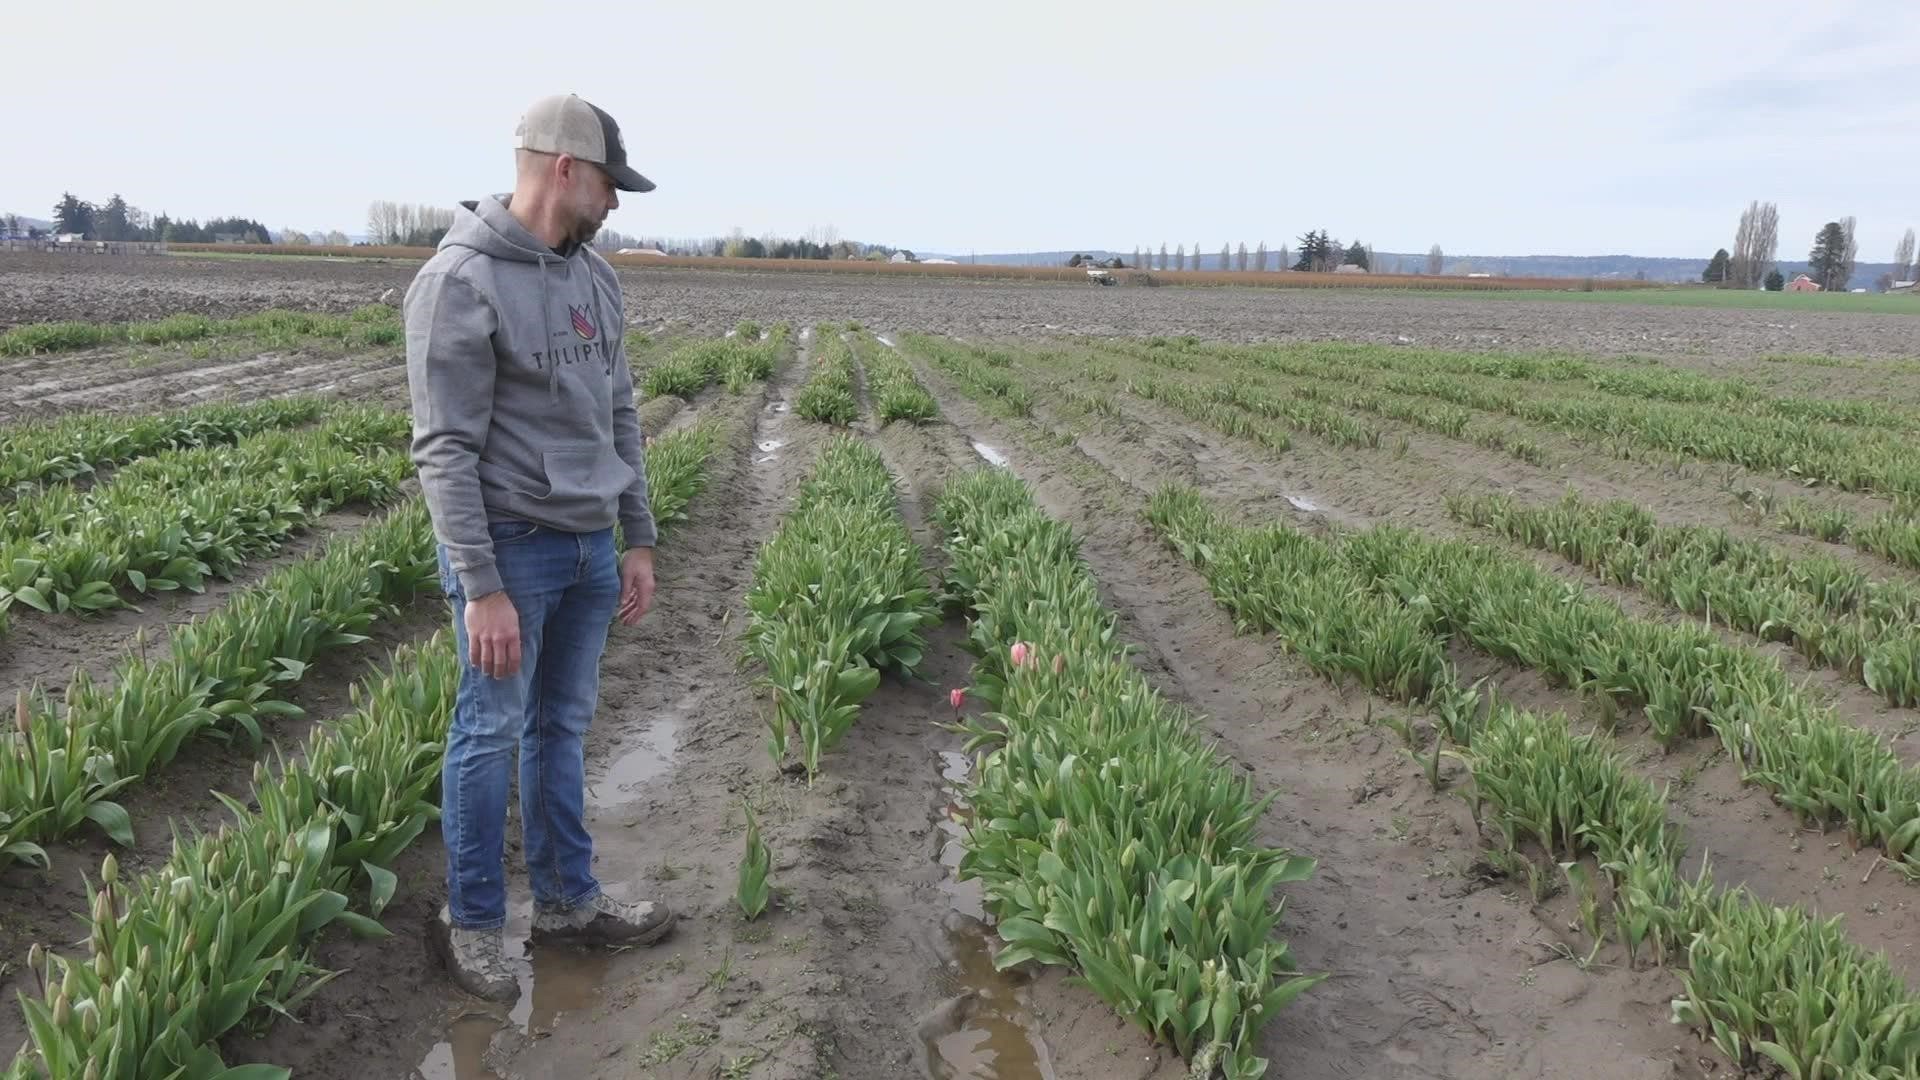 There’s trouble in Tulip Town but some of the Skagit Valley's newest farmers say they’re determined to spring in to April.